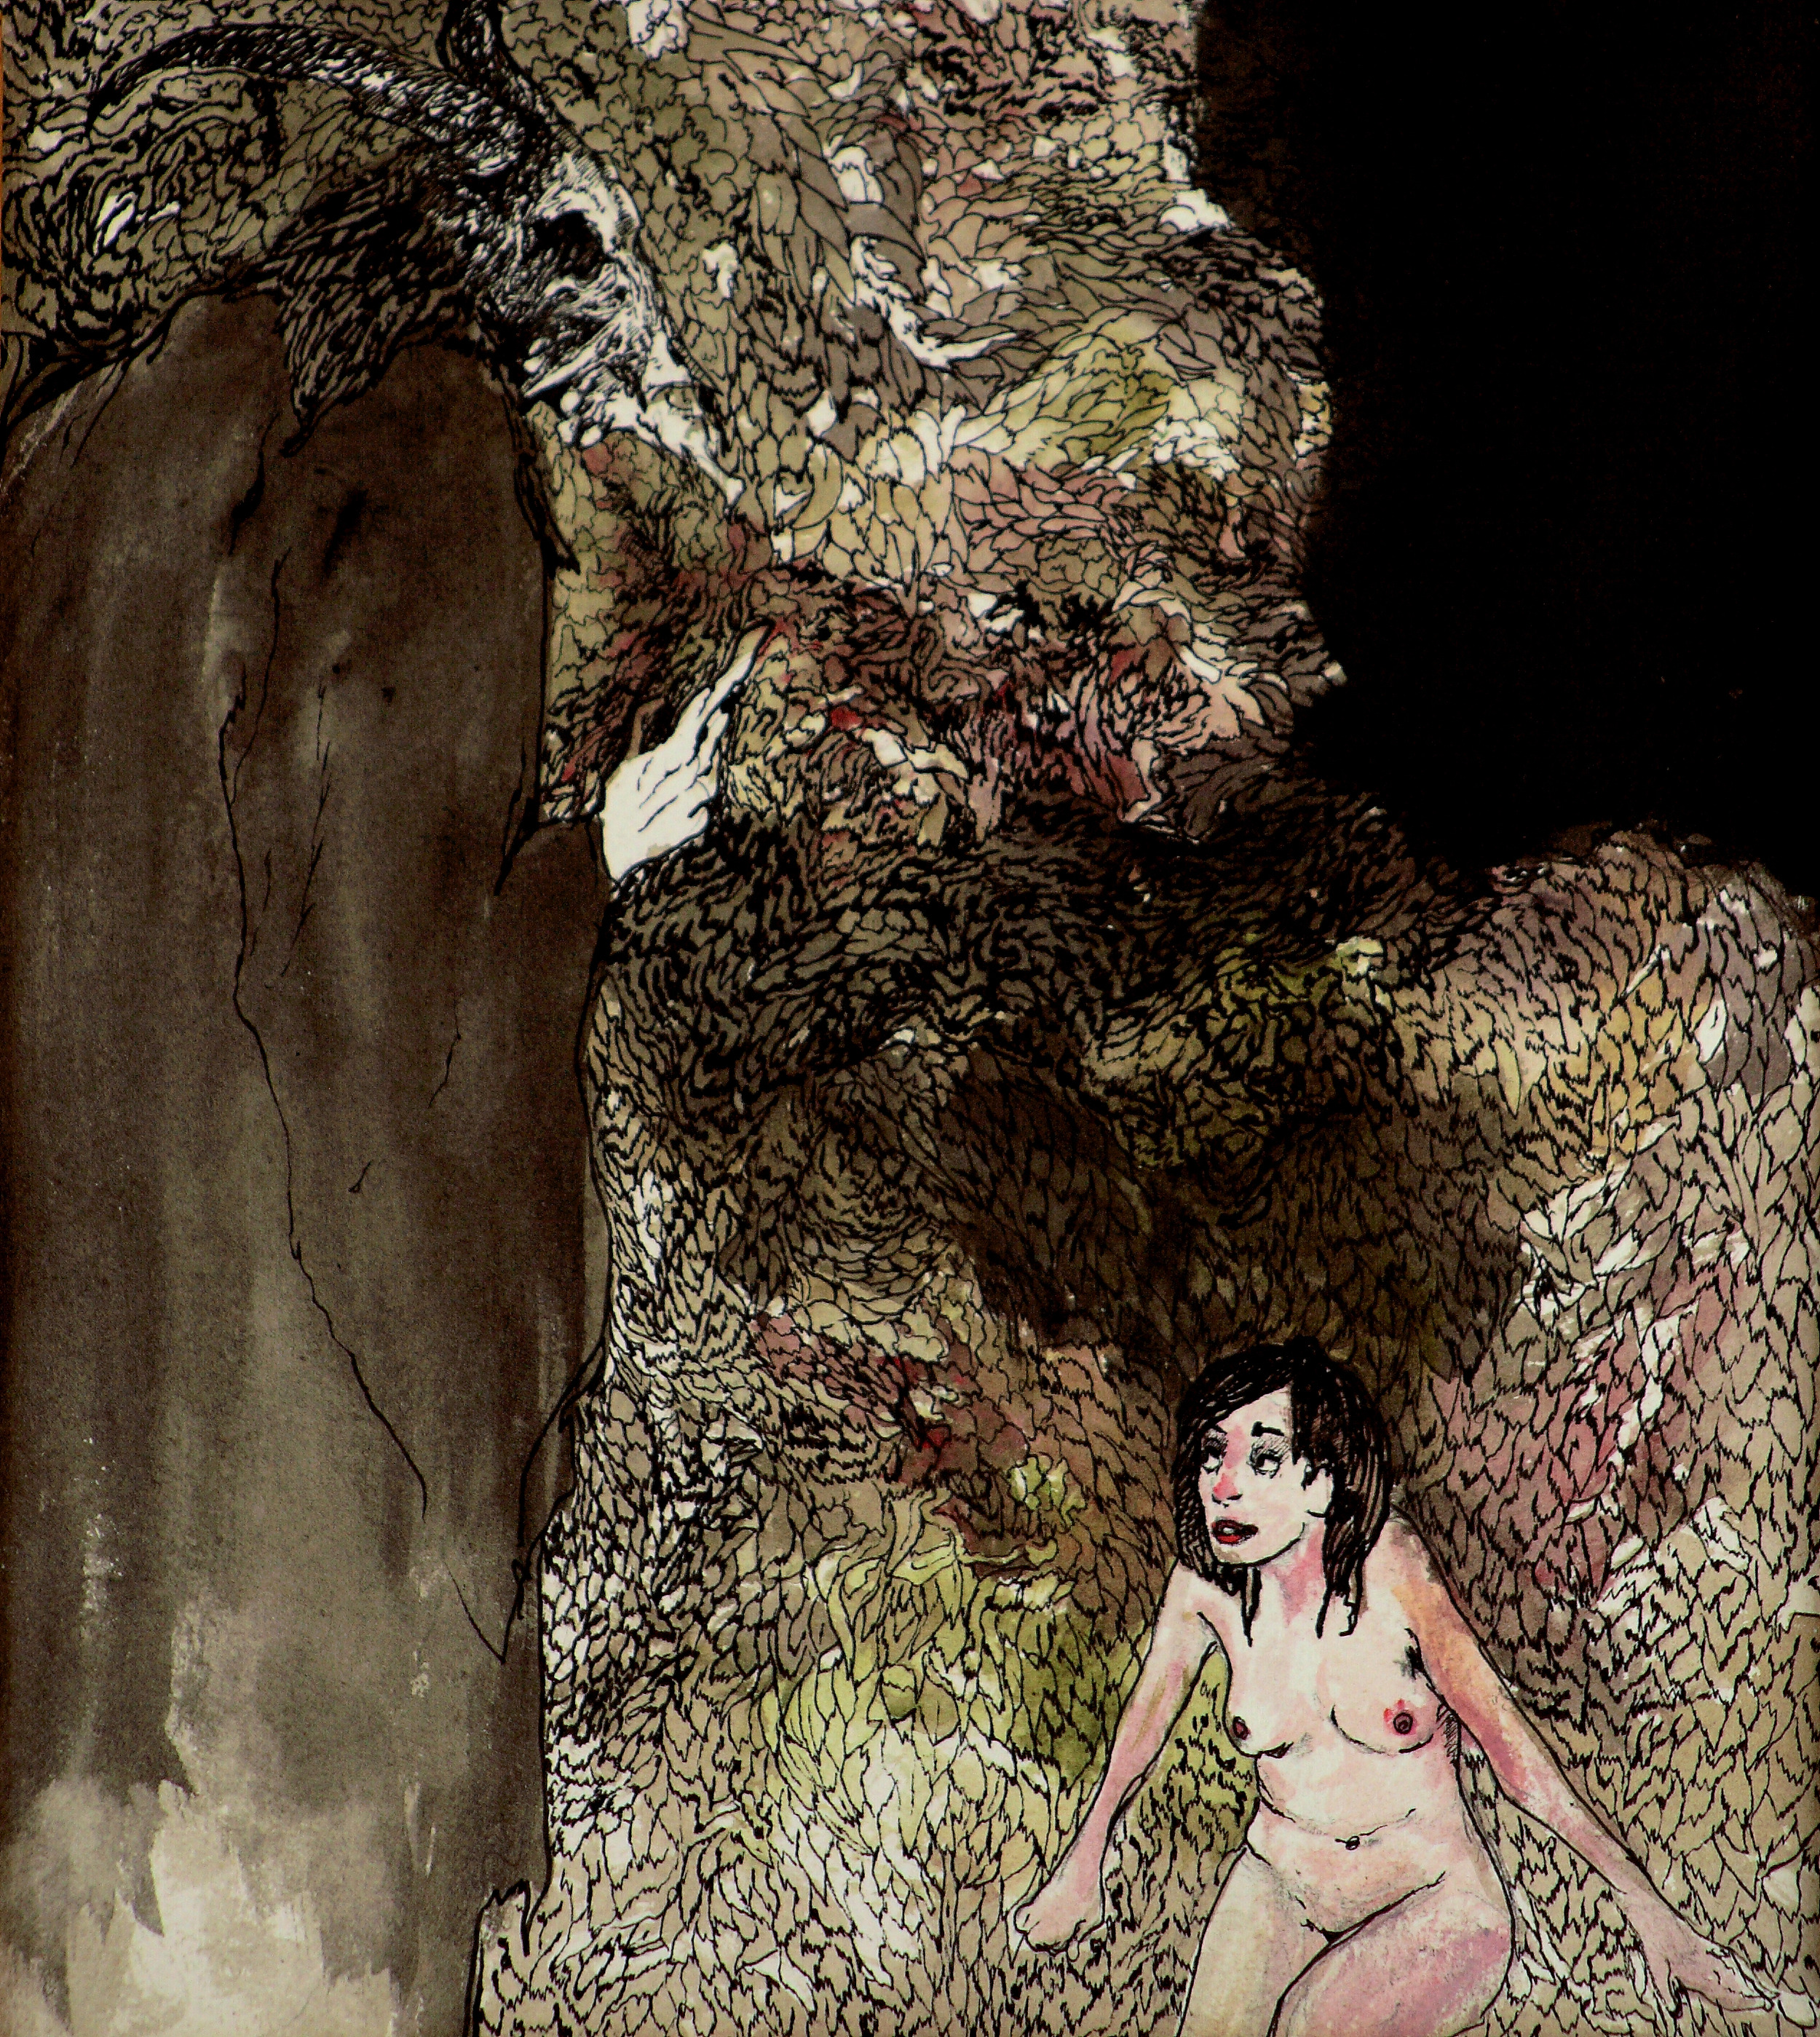    Lilith in the Garden.  &nbsp;2014. 12 x 13 inches. Watercolor on paper. 